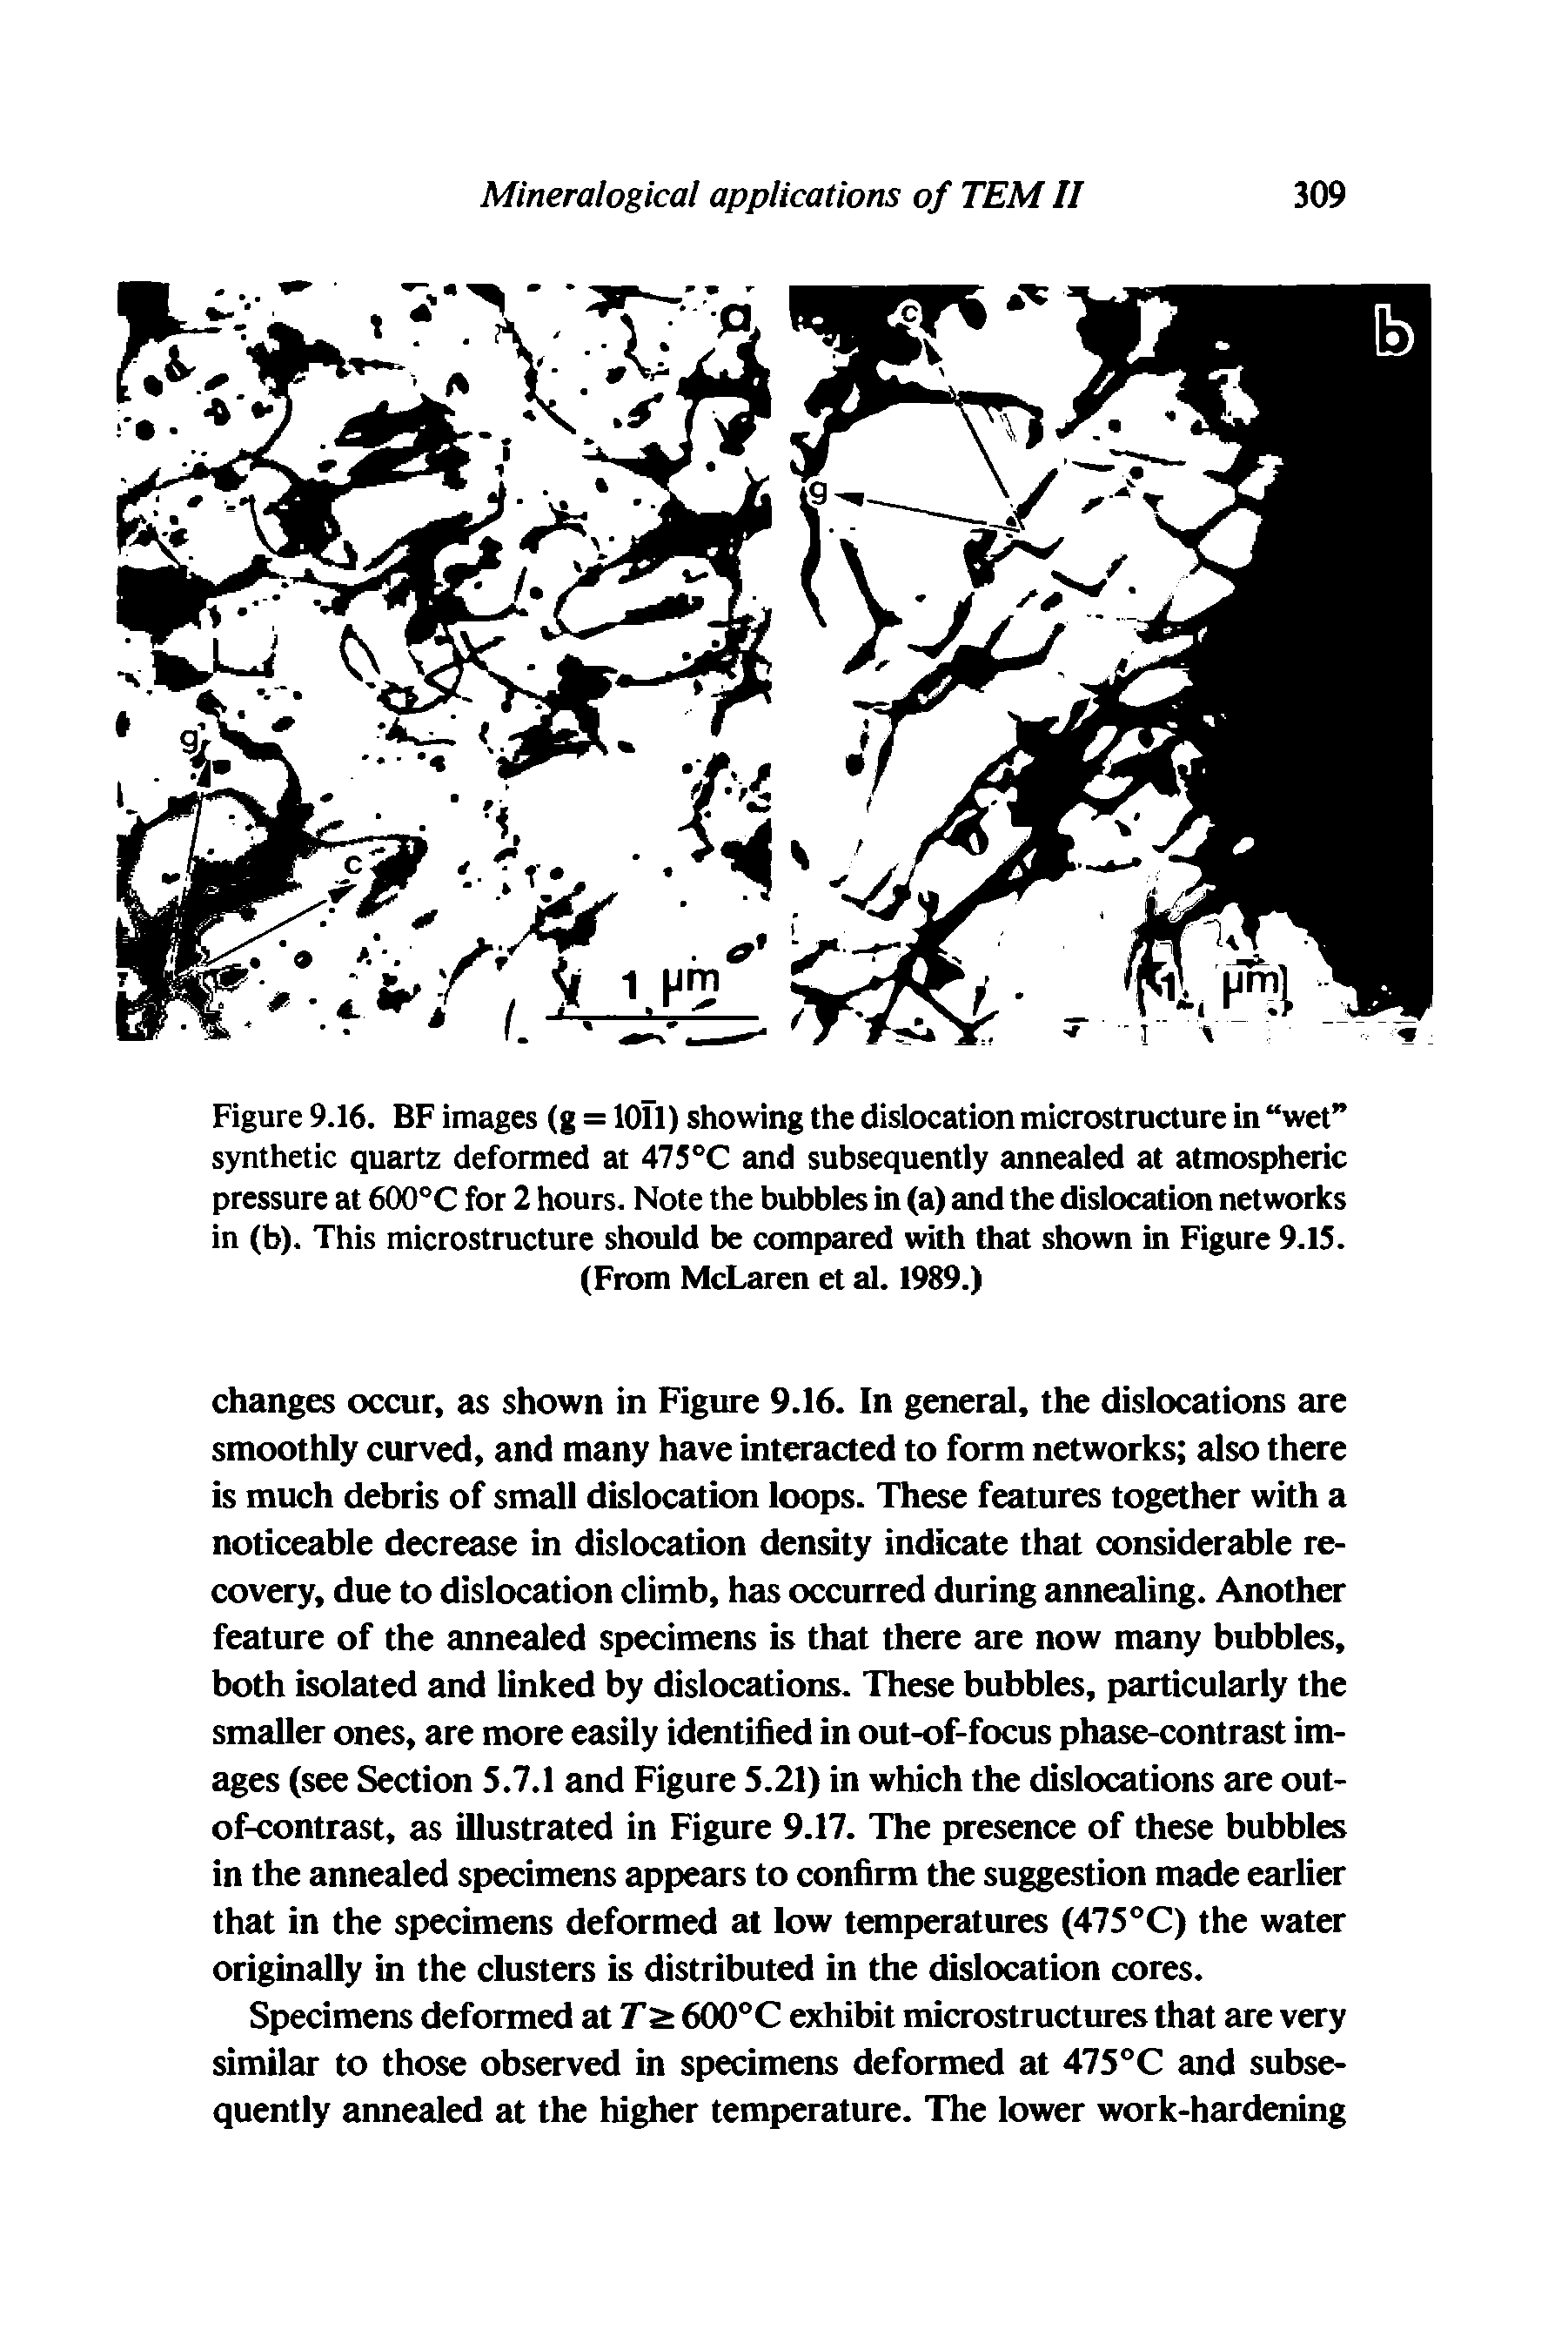 Figure 9.16. BF images (g = lOU) showing the dislocation microstructure in wet synthetic quartz deformed at 475°C and subsequently annealed at atmospheric pressure at 600°C for 2 hours. Note the bubbles in (a) and the dislocation networks in (b). This microstructure should be compared with that shown in Figure 9.IS.